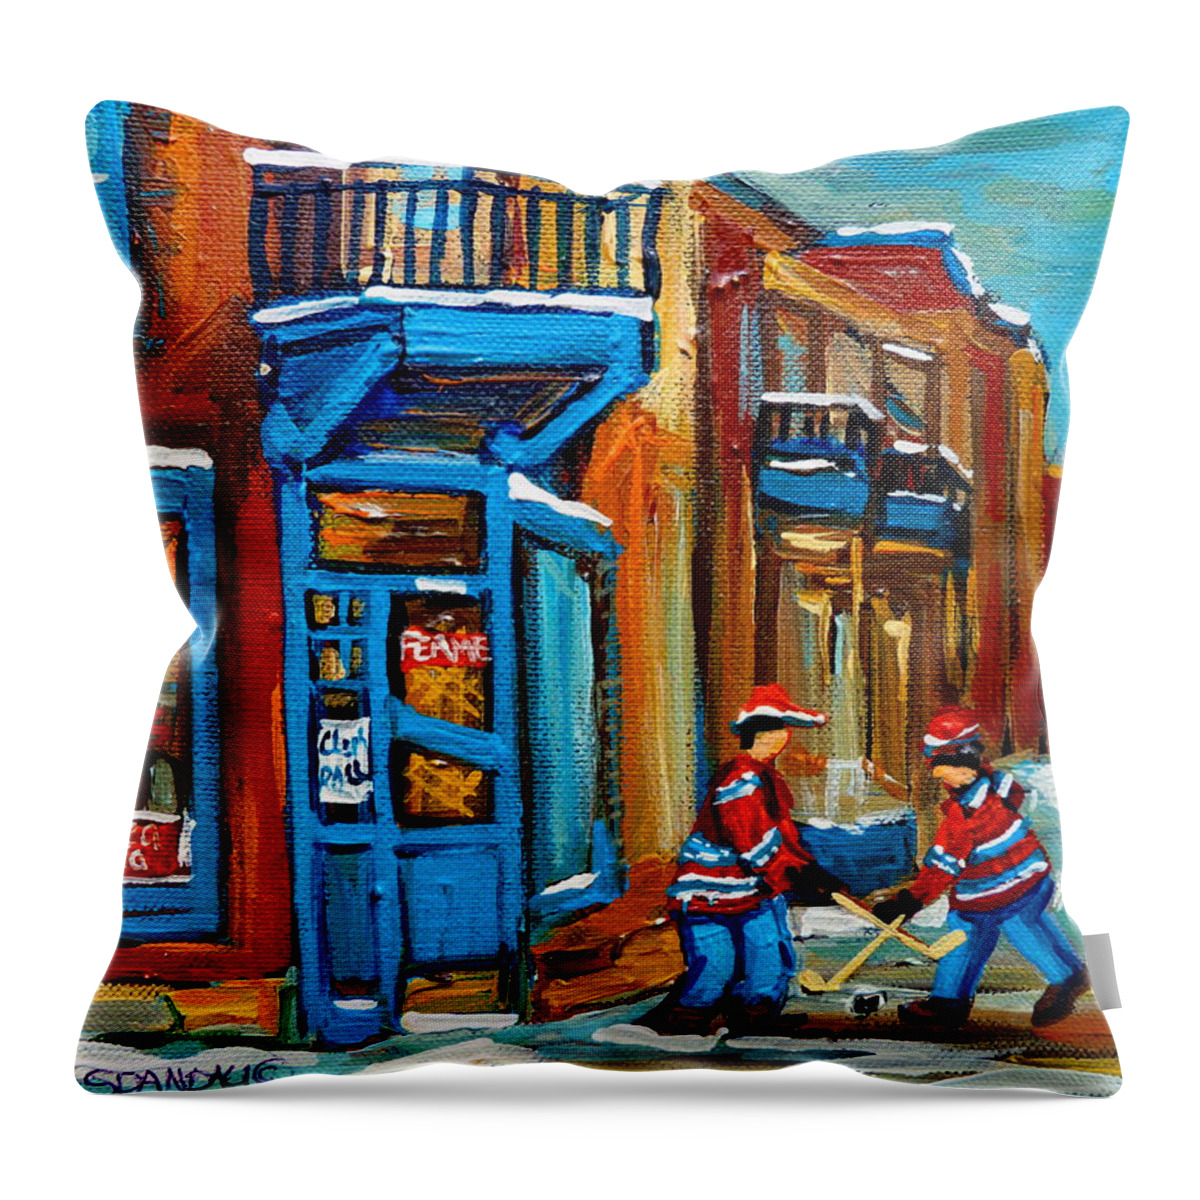 Montreal Throw Pillow featuring the painting Street Hockey At Wilensky's Montreal by Carole Spandau